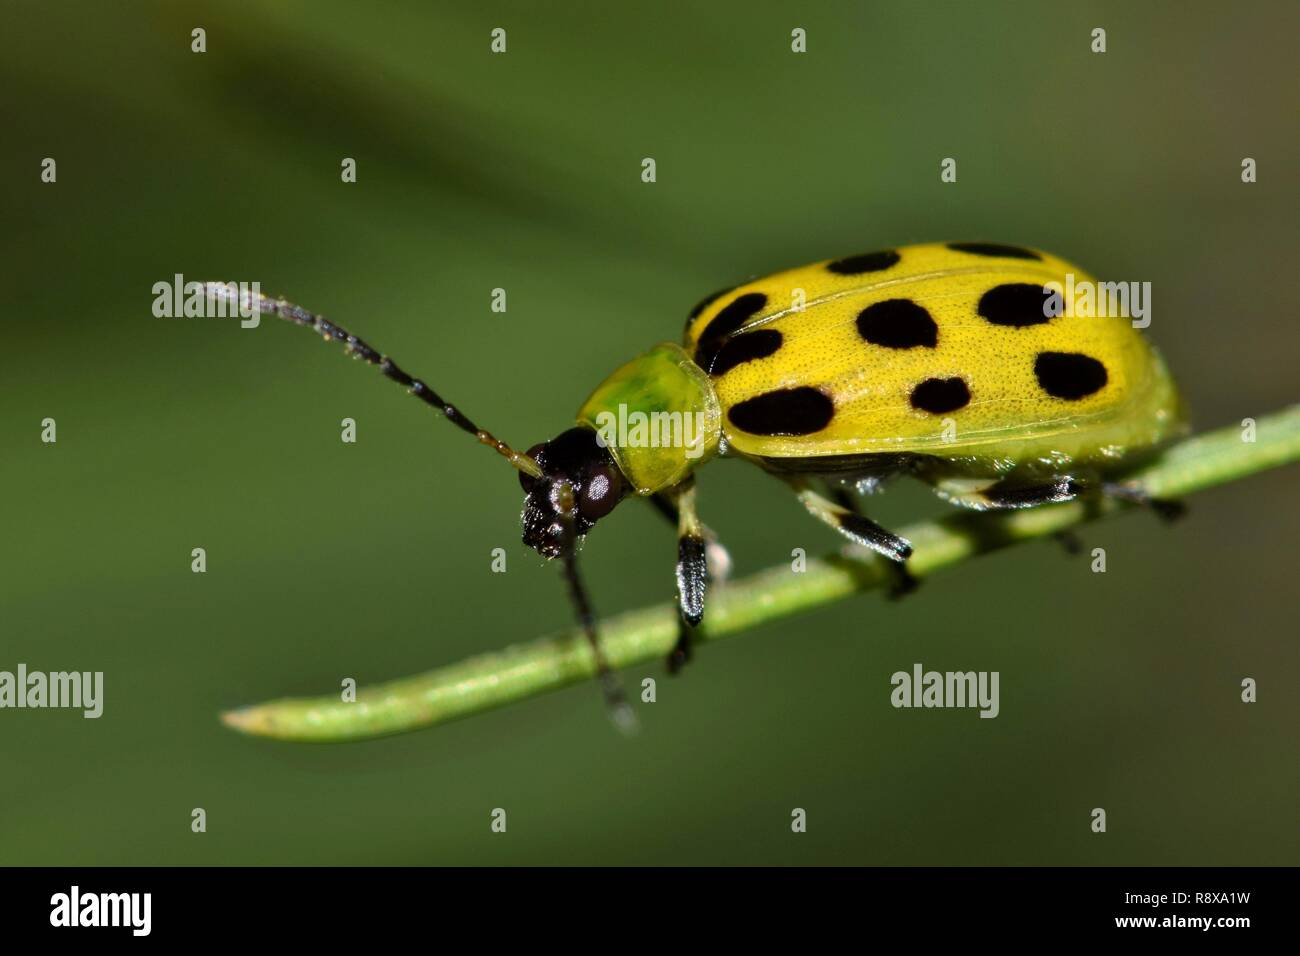 A Spotted Cucumber Beetle (Diabrotica undecimpunctata) makes its way along a pine needle. These beetles are considered pests in many parts of the US. Stock Photo